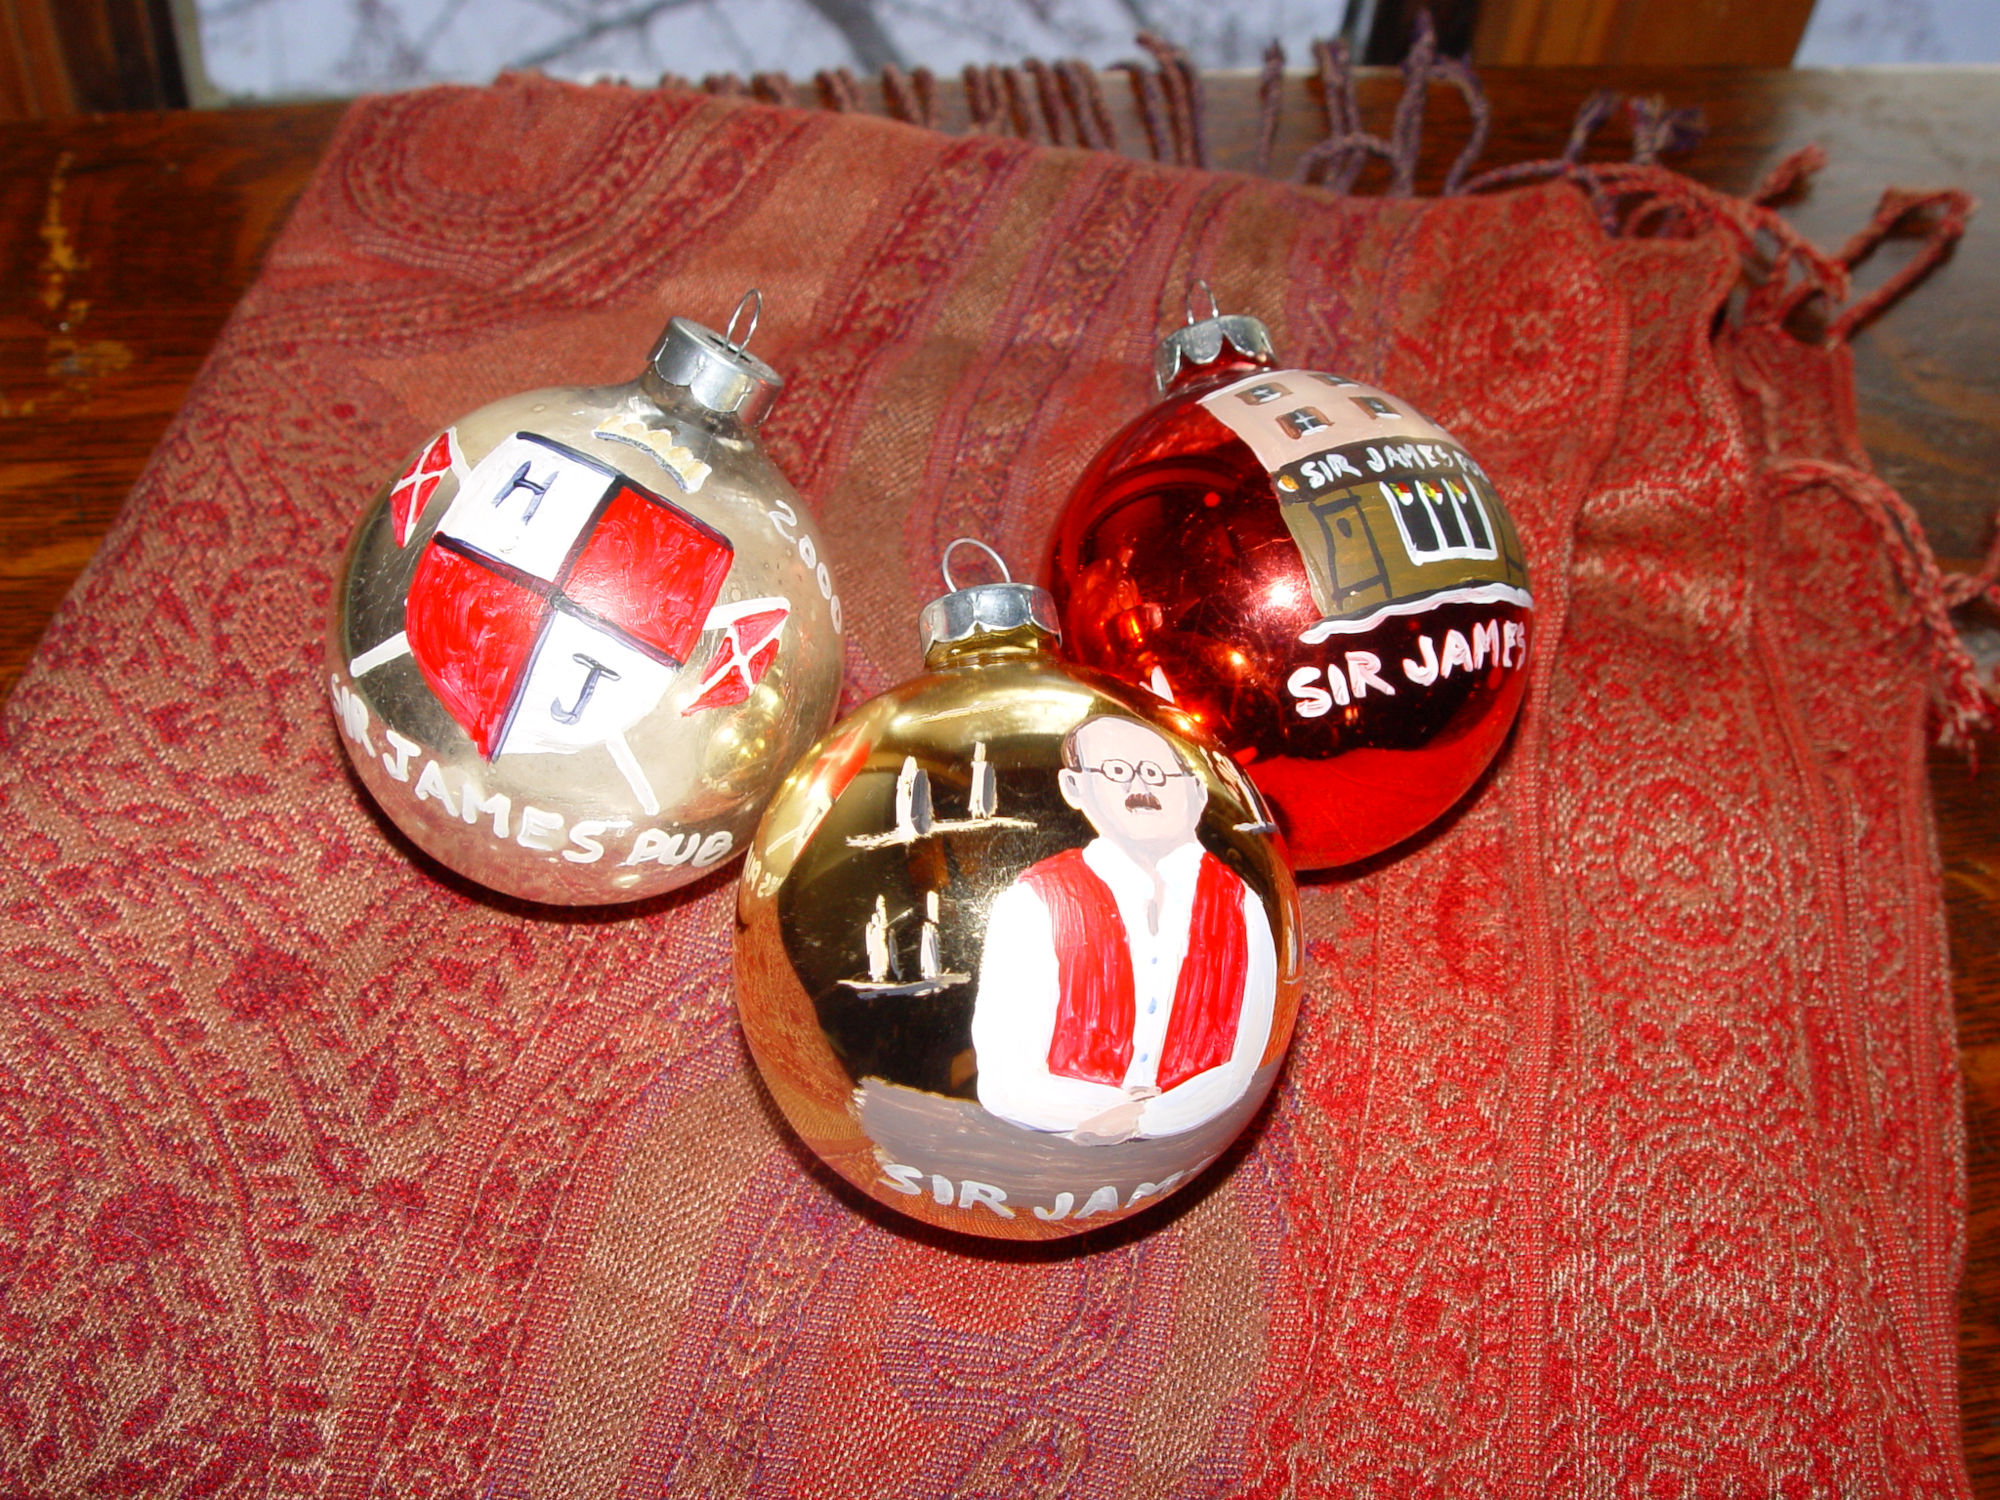 Christmas Signed Hand
                                        Painted Ornaments; Sir James Pub
                                        Port Washington Wisc